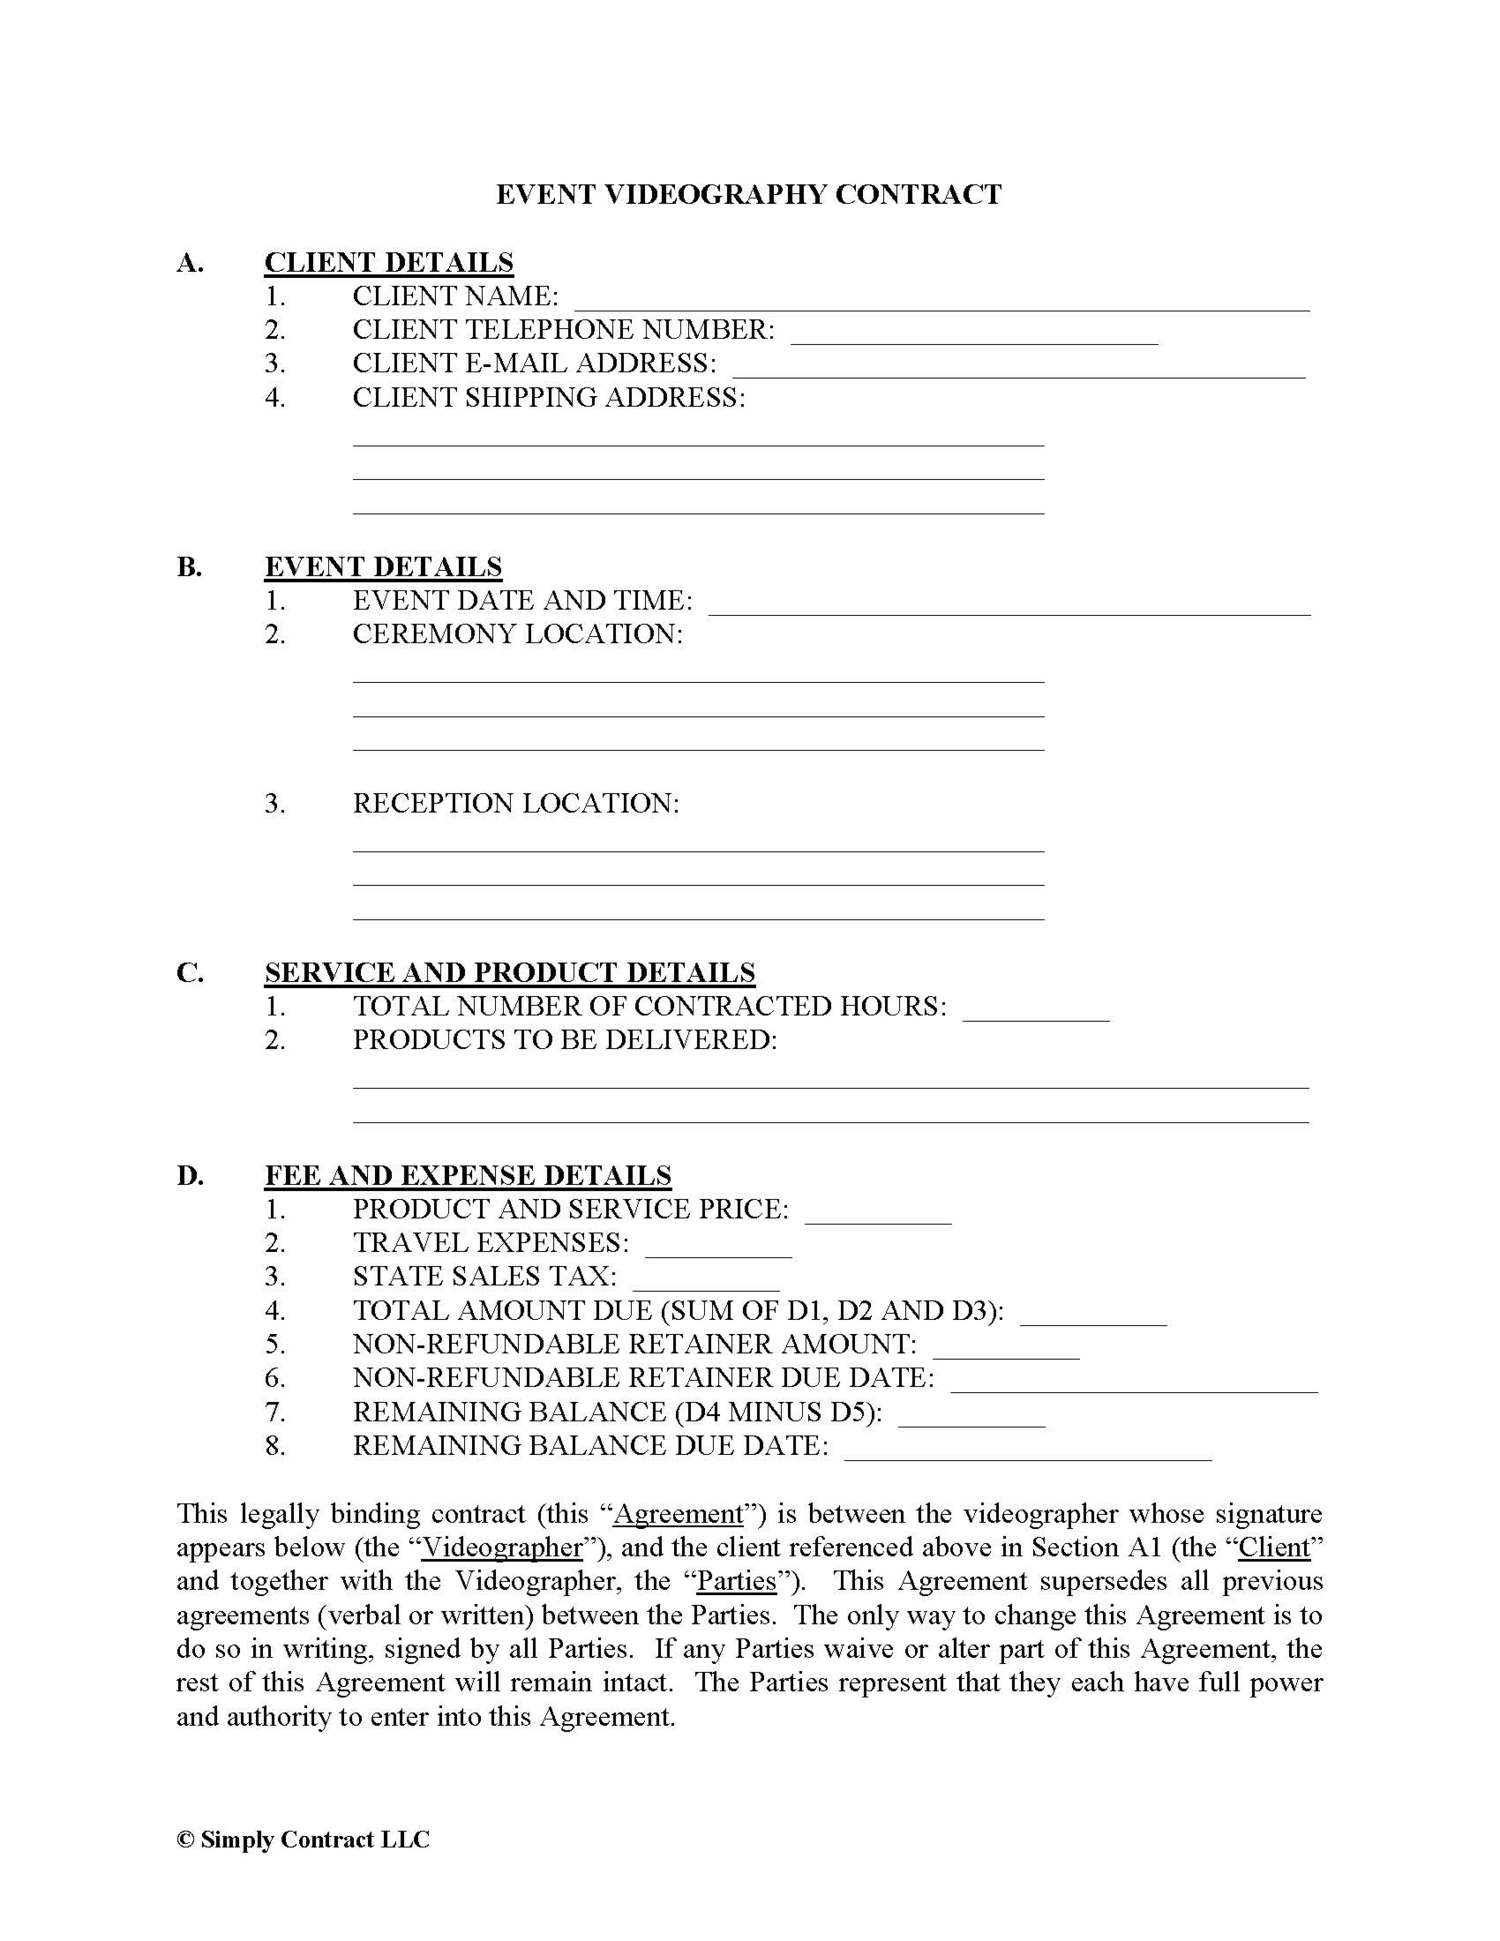 Videography Contract Examples in PDF